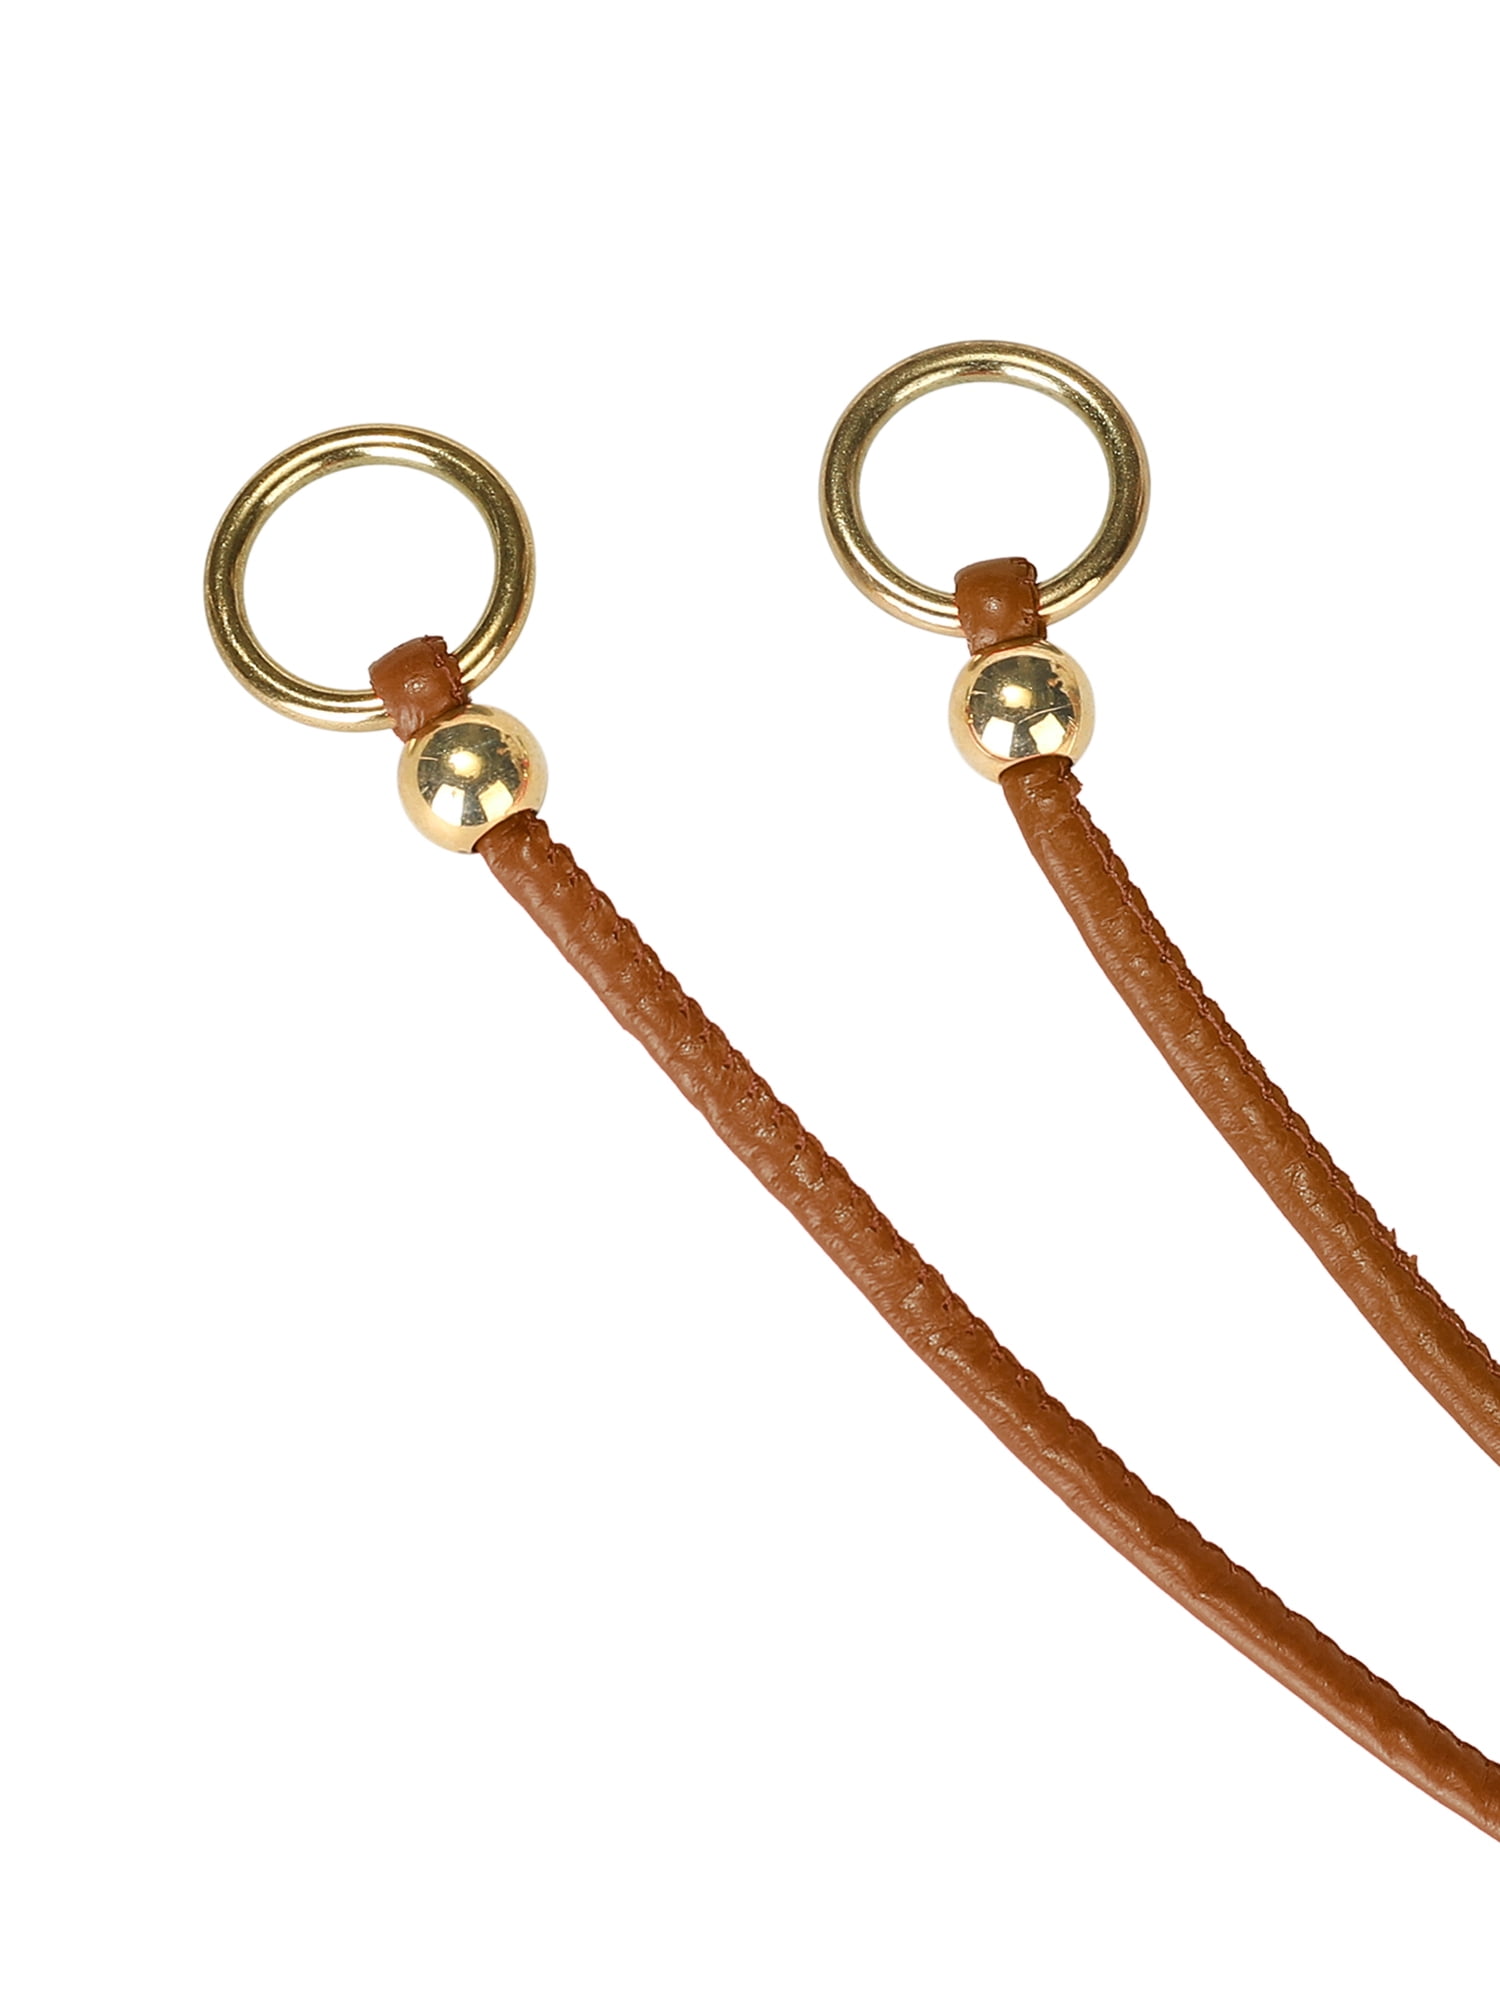 Cast Rope Belt - Tan Suede with Antique Brass – Kim White Bags/Belts